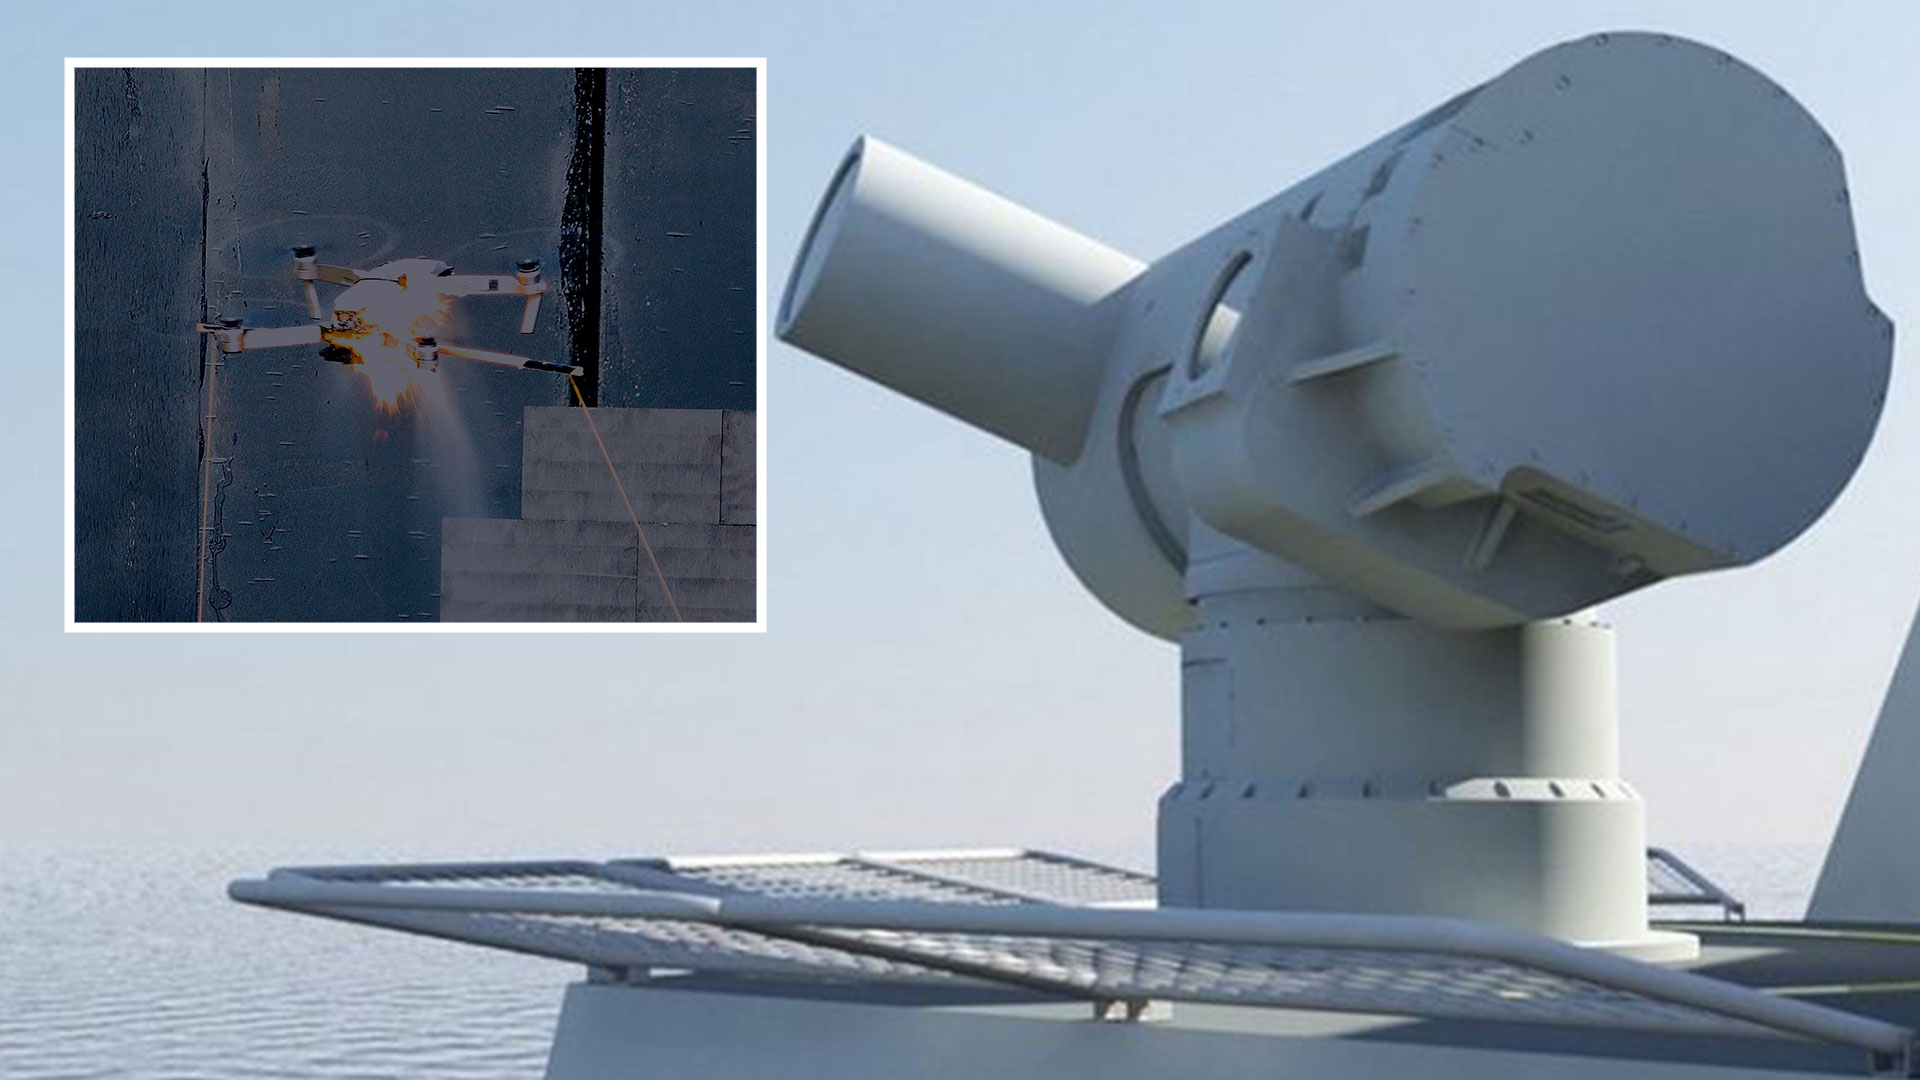 Star Wars laser weapon of Star Wars style tested and destroyed a drone 2 miles away